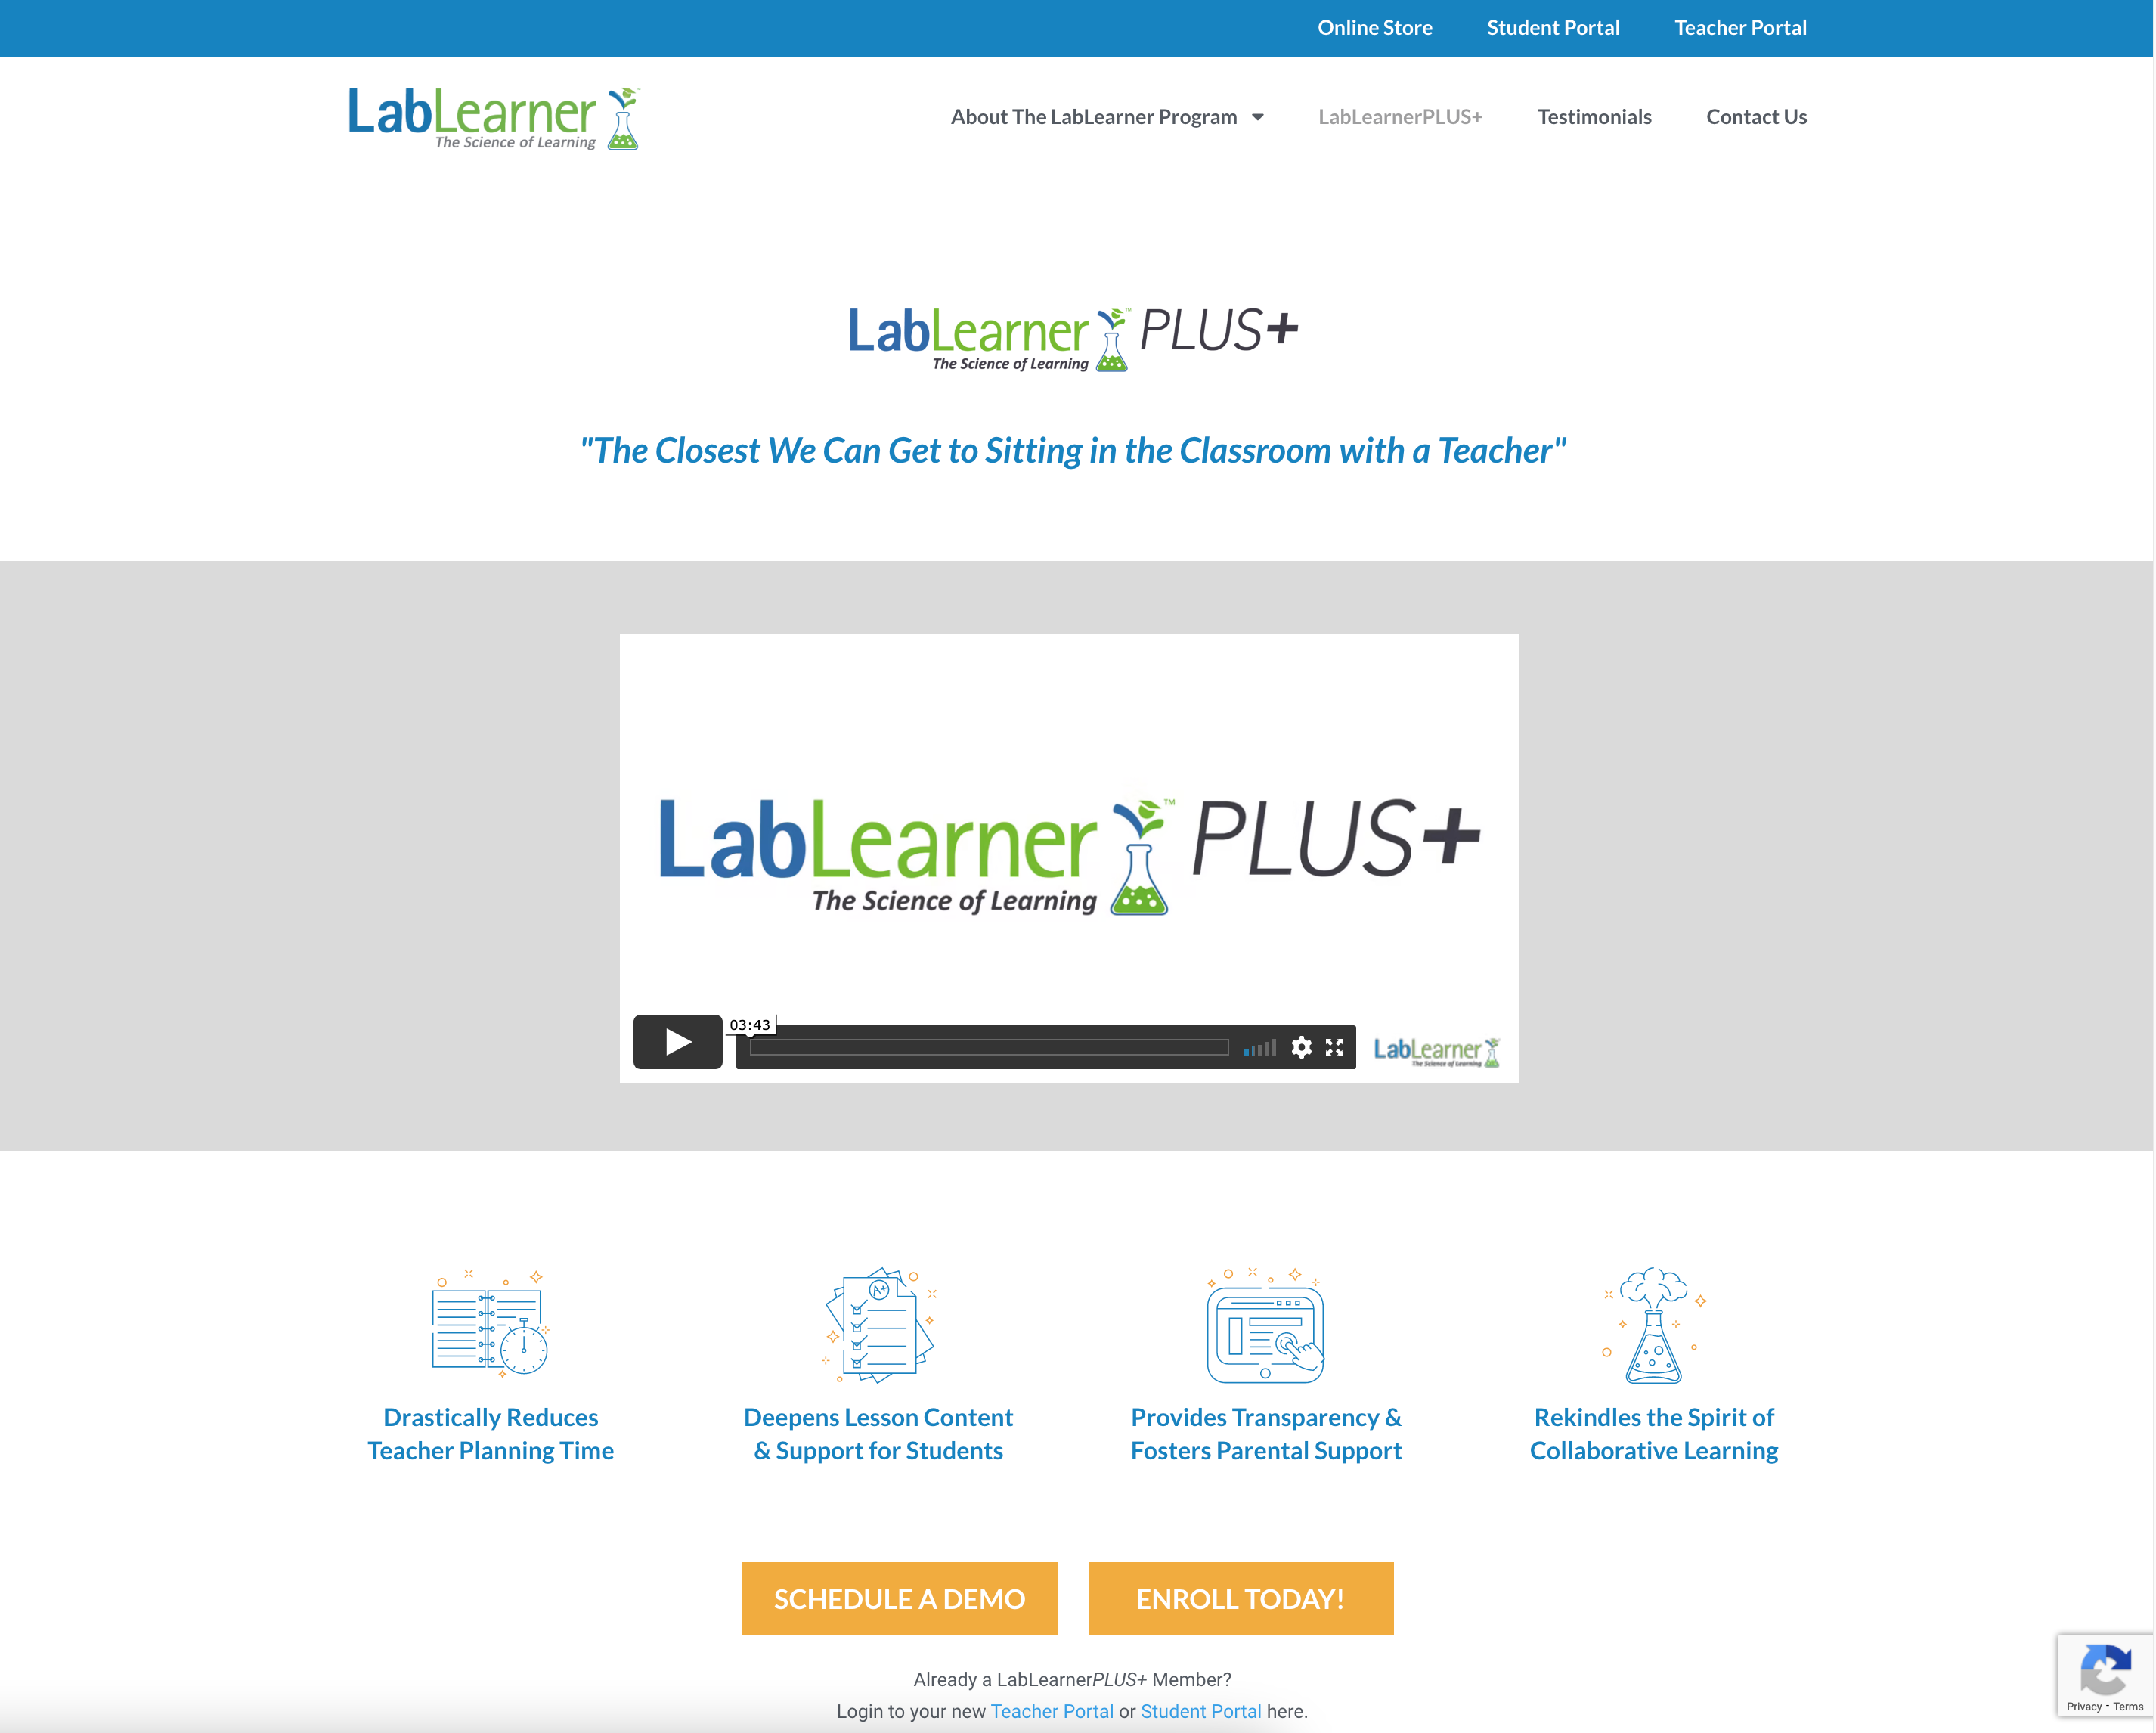 LabLearner video tutorial and demo